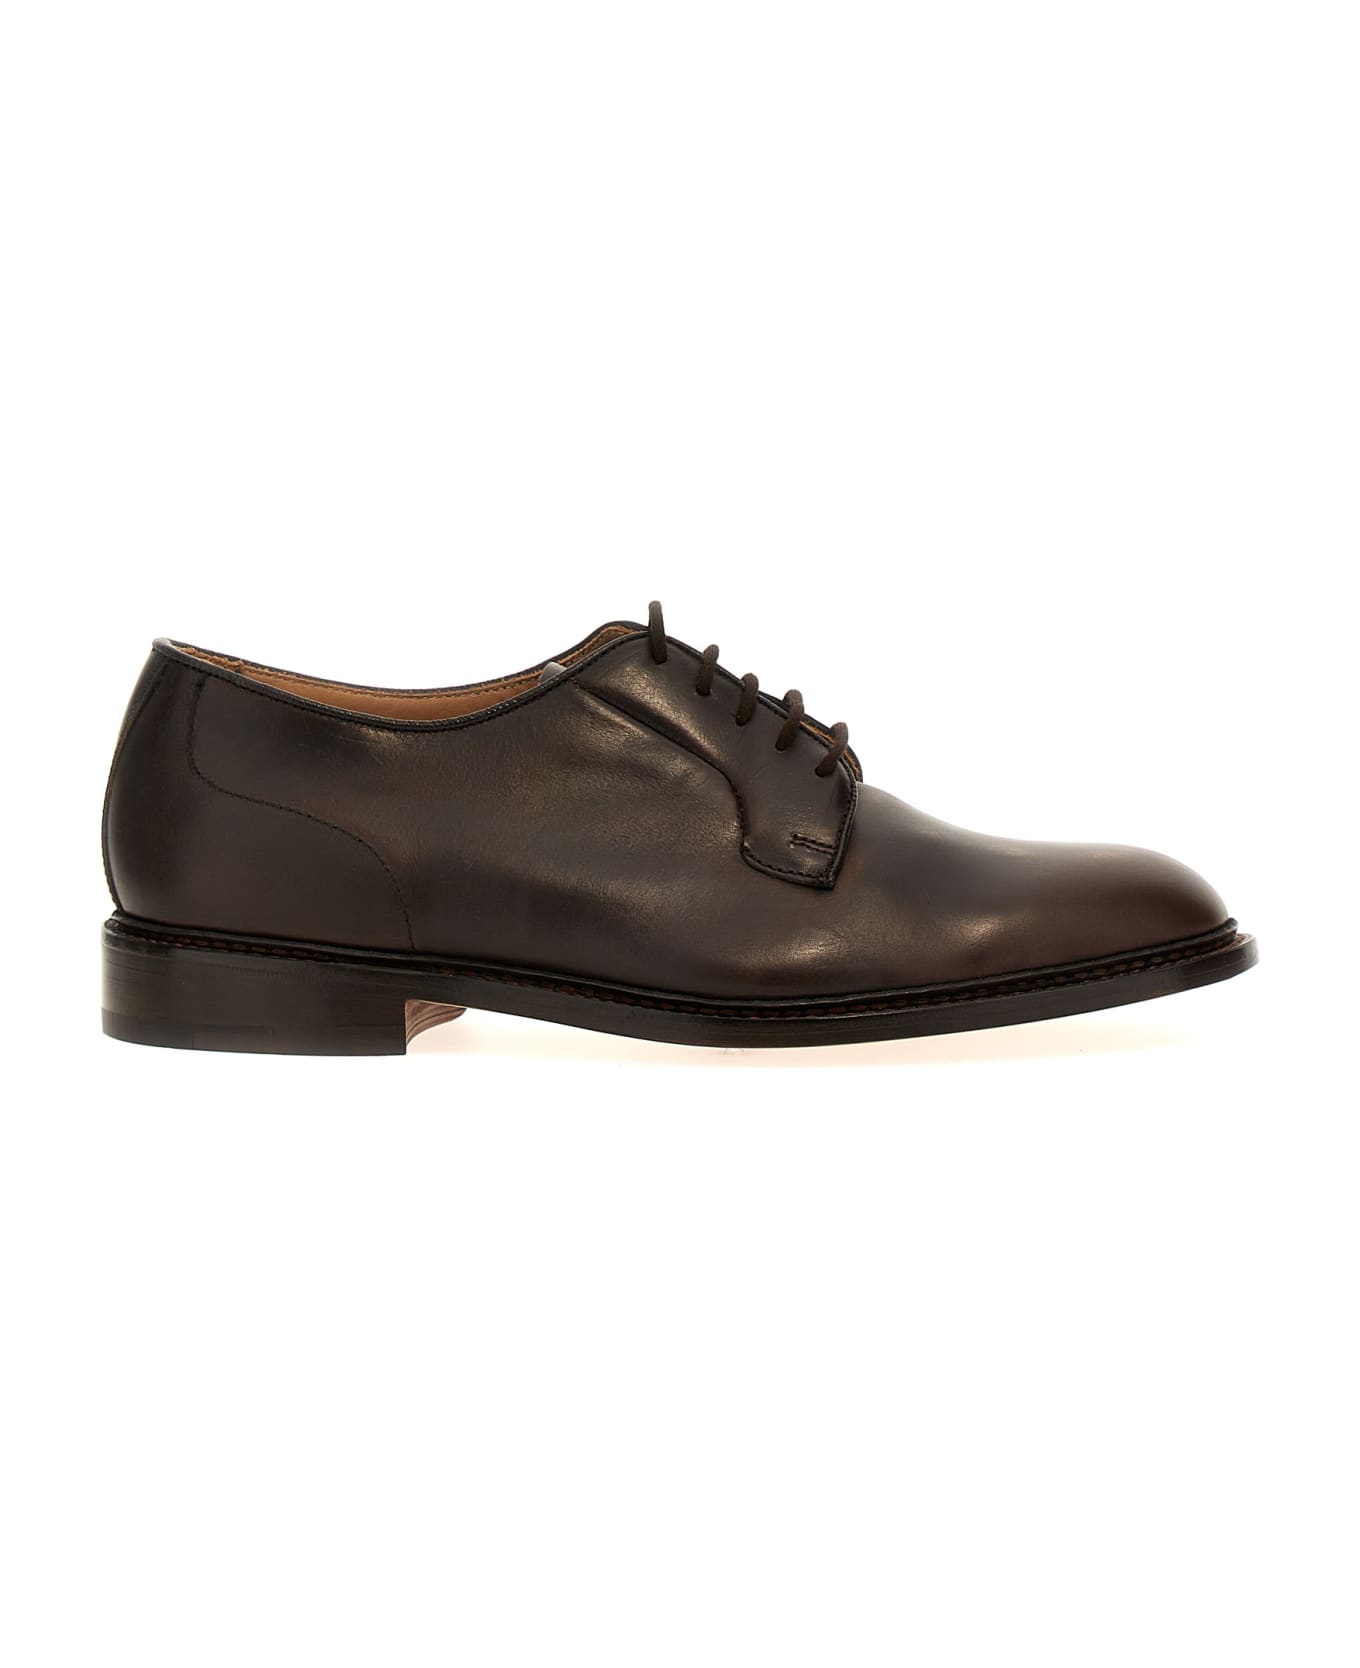 Tricker's 'robert' Lace Up Shoes - Brown